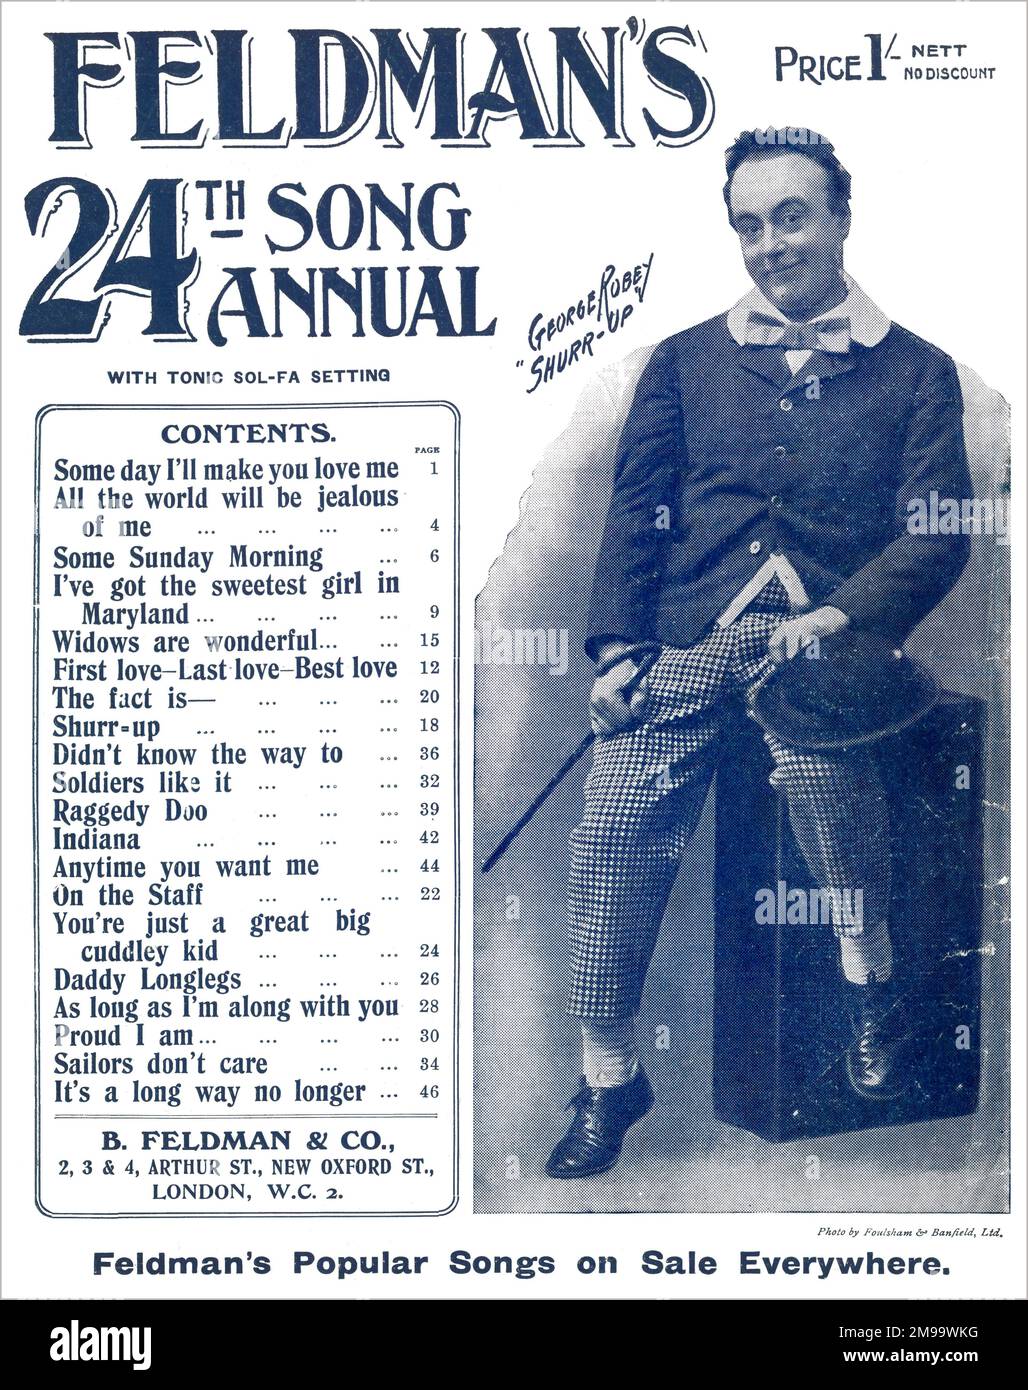 Feldman's 24th Song Annual with Tonic Sol-fa setting. George Robey featured with his hit 'Shurr-up'. Stock Photo